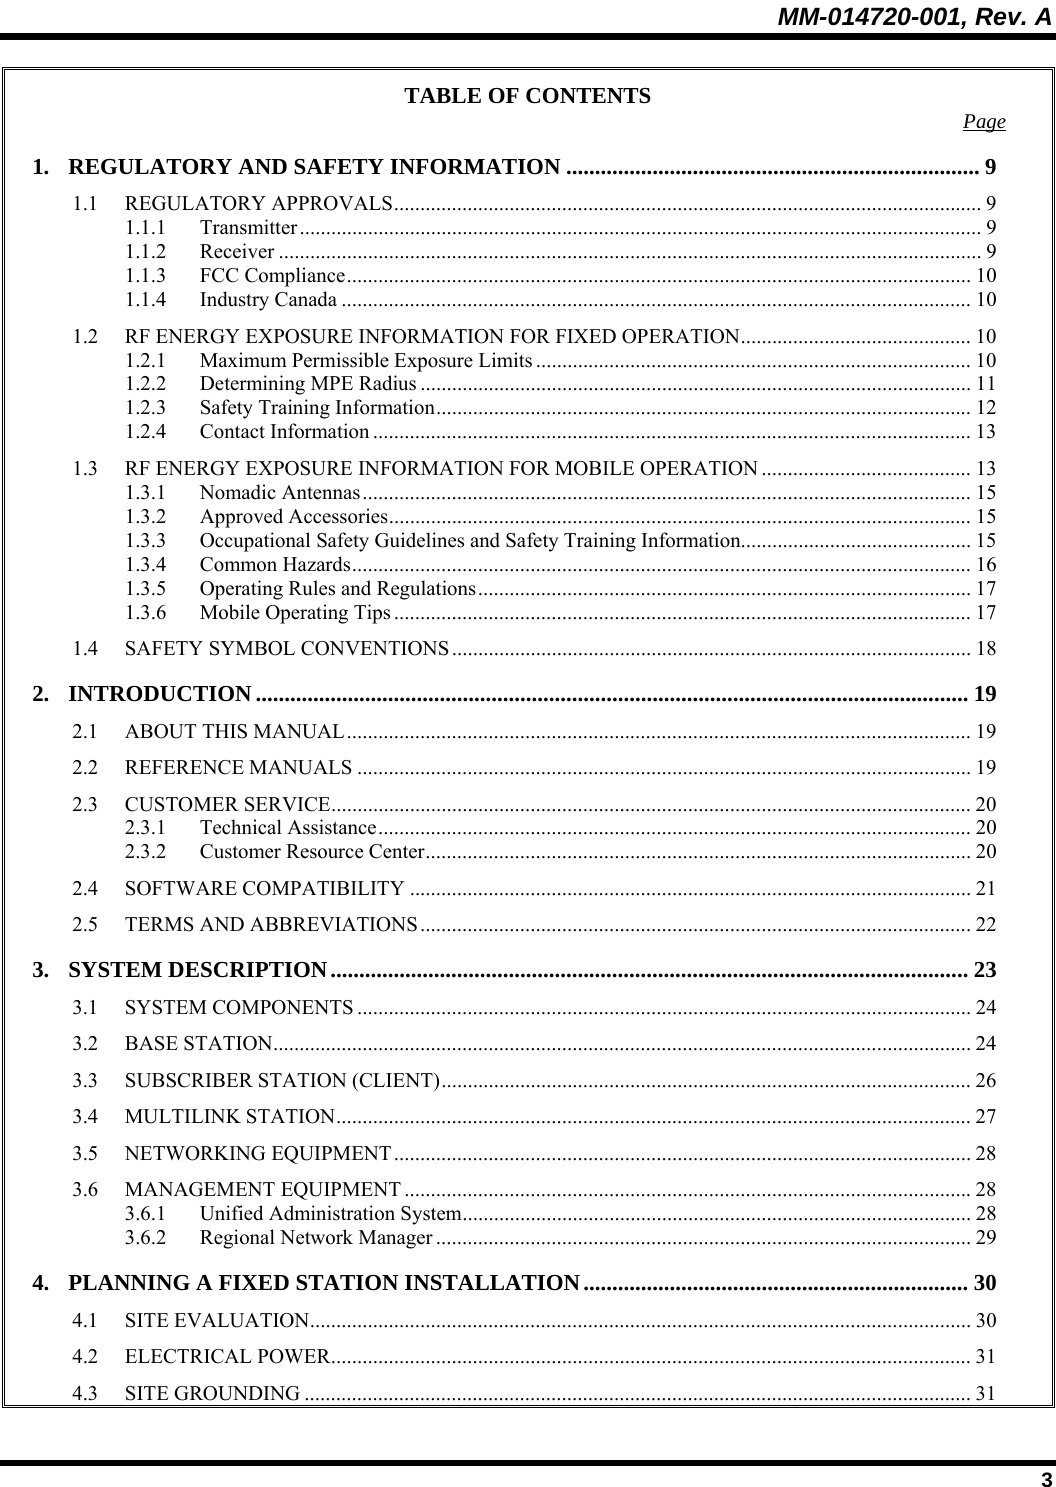 MM-014720-001, Rev. A  3 TABLE OF CONTENTS  Page 1. REGULATORY AND SAFETY INFORMATION ........................................................................ 9 1.1 REGULATORY APPROVALS................................................................................................................ 9 1.1.1 Transmitter.................................................................................................................................. 9 1.1.2 Receiver ...................................................................................................................................... 9 1.1.3 FCC Compliance....................................................................................................................... 10 1.1.4 Industry Canada ........................................................................................................................ 10 1.2 RF ENERGY EXPOSURE INFORMATION FOR FIXED OPERATION............................................ 10 1.2.1 Maximum Permissible Exposure Limits ................................................................................... 10 1.2.2 Determining MPE Radius ......................................................................................................... 11 1.2.3 Safety Training Information...................................................................................................... 12 1.2.4 Contact Information .................................................................................................................. 13 1.3 RF ENERGY EXPOSURE INFORMATION FOR MOBILE OPERATION ........................................ 13 1.3.1 Nomadic Antennas.................................................................................................................... 15 1.3.2 Approved Accessories............................................................................................................... 15 1.3.3 Occupational Safety Guidelines and Safety Training Information............................................ 15 1.3.4 Common Hazards...................................................................................................................... 16 1.3.5 Operating Rules and Regulations.............................................................................................. 17 1.3.6 Mobile Operating Tips .............................................................................................................. 17 1.4 SAFETY SYMBOL CONVENTIONS ................................................................................................... 18 2. INTRODUCTION ............................................................................................................................ 19 2.1 ABOUT THIS MANUAL....................................................................................................................... 19 2.2 REFERENCE MANUALS ..................................................................................................................... 19 2.3 CUSTOMER SERVICE.......................................................................................................................... 20 2.3.1 Technical Assistance................................................................................................................. 20 2.3.2 Customer Resource Center........................................................................................................20 2.4 SOFTWARE COMPATIBILITY ........................................................................................................... 21 2.5 TERMS AND ABBREVIATIONS.........................................................................................................22 3. SYSTEM DESCRIPTION............................................................................................................... 23 3.1 SYSTEM COMPONENTS ..................................................................................................................... 24 3.2 BASE STATION..................................................................................................................................... 24 3.3 SUBSCRIBER STATION (CLIENT).....................................................................................................26 3.4 MULTILINK STATION......................................................................................................................... 27 3.5 NETWORKING EQUIPMENT.............................................................................................................. 28 3.6 MANAGEMENT EQUIPMENT ............................................................................................................28 3.6.1 Unified Administration System................................................................................................. 28 3.6.2 Regional Network Manager ...................................................................................................... 29 4. PLANNING A FIXED STATION INSTALLATION................................................................... 30 4.1 SITE EVALUATION.............................................................................................................................. 30 4.2 ELECTRICAL POWER.......................................................................................................................... 31 4.3 SITE GROUNDING ............................................................................................................................... 31 